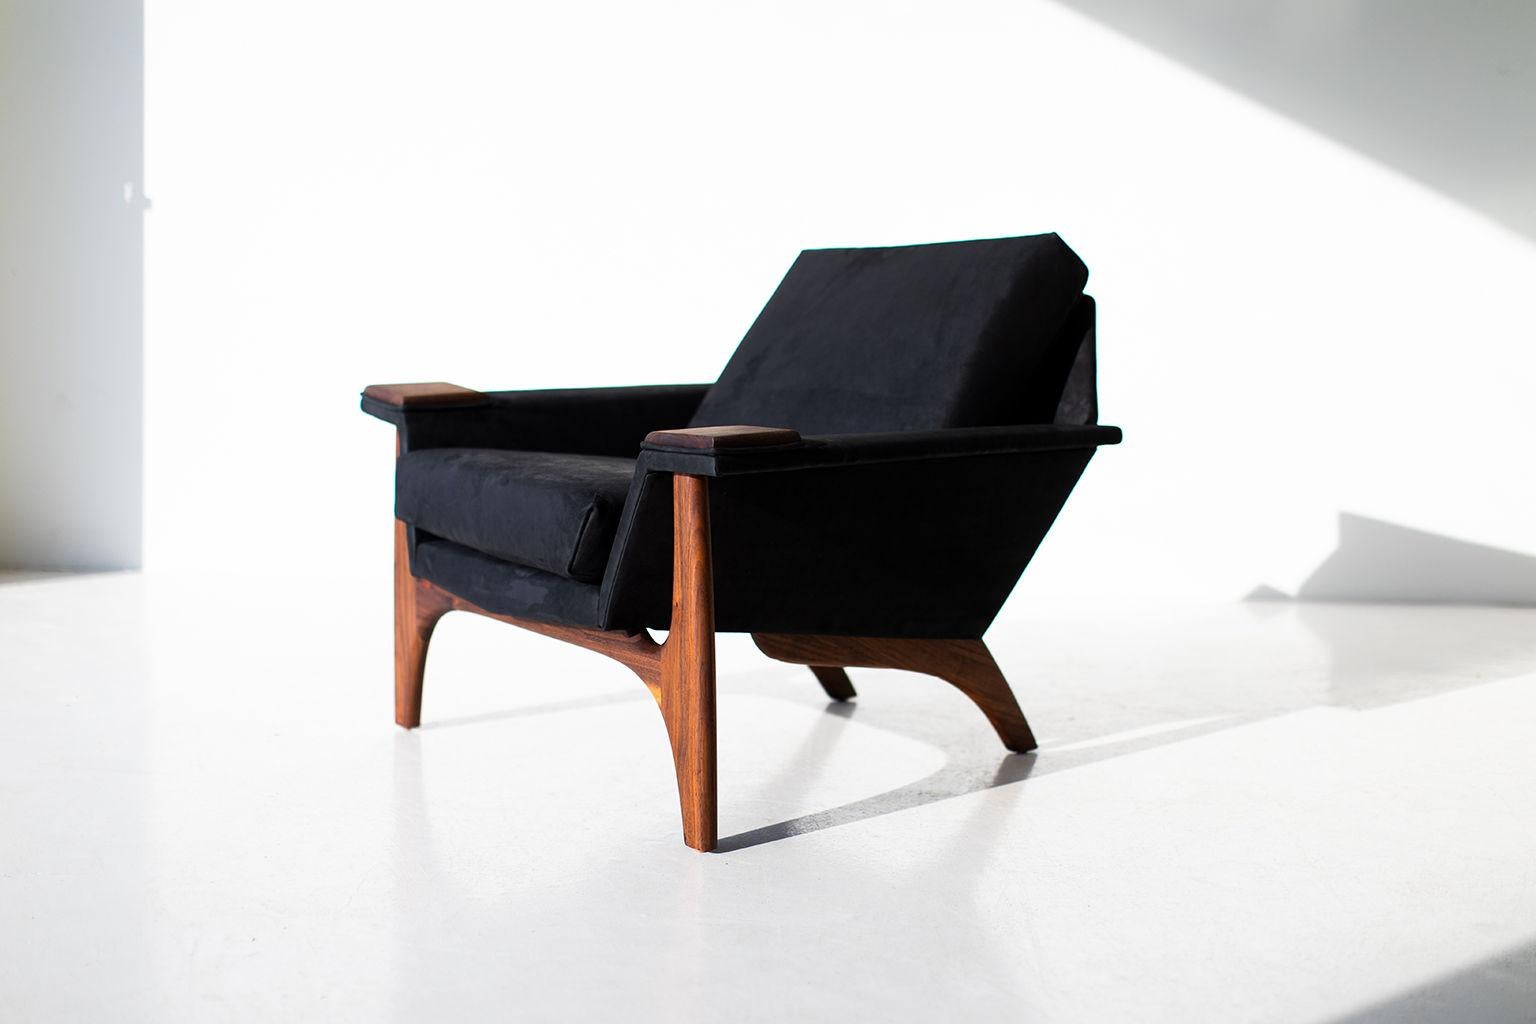 Designer: Adrian Pearsall.

Manufacturer: Craft Associates Inc.
Period/Model: Mid-Century Modern.
Specs: Walnut, leather.

Condition:

This Adrian Pearsall leather lounge chair for Craft Associates Inc : Model 2313 is in excellent restored